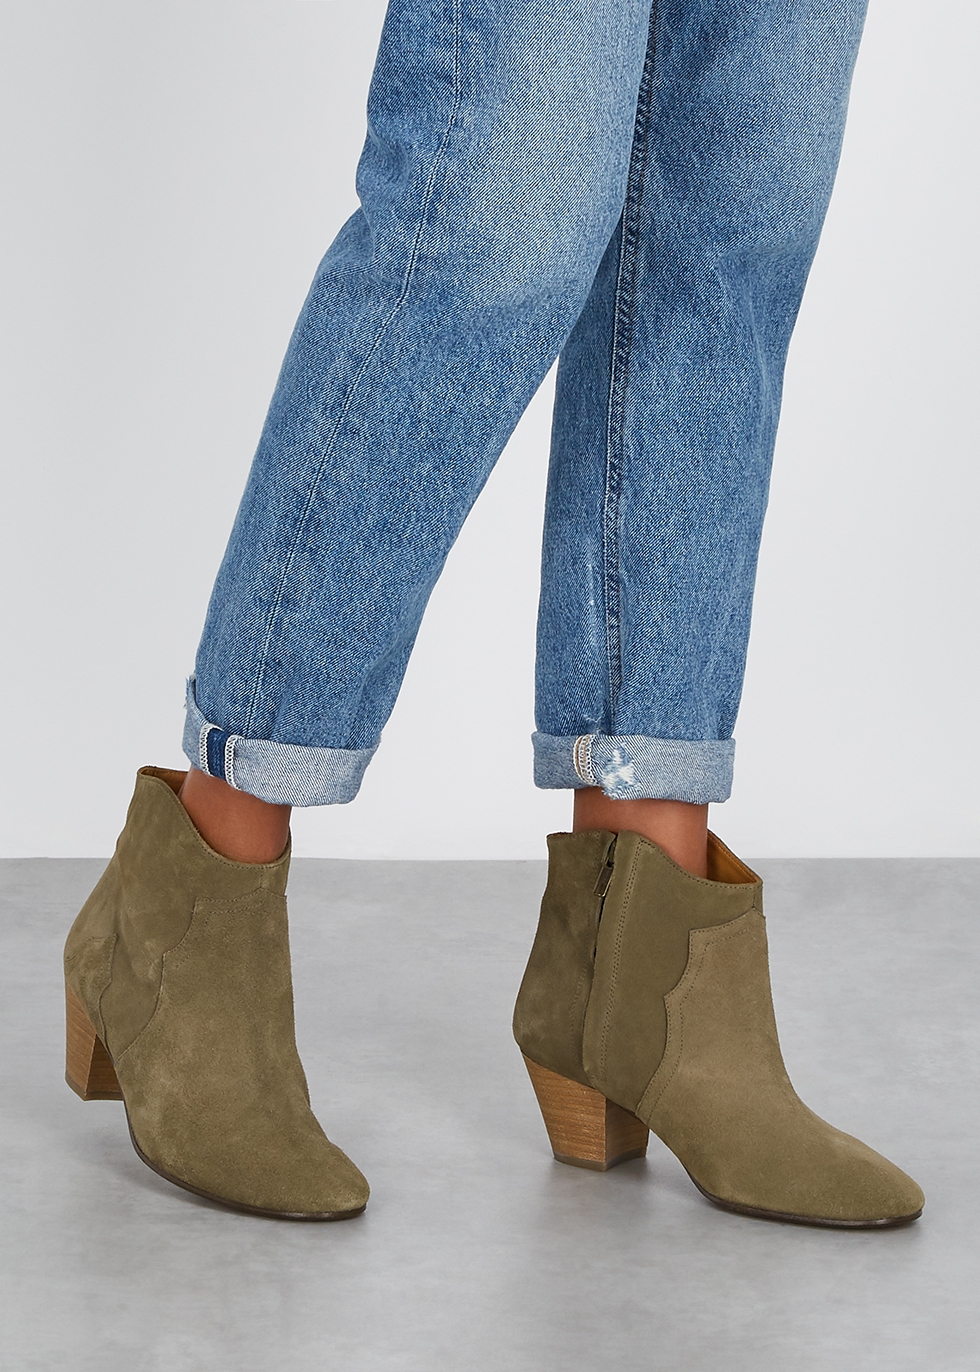 isabel marant dicker leather ankle boots